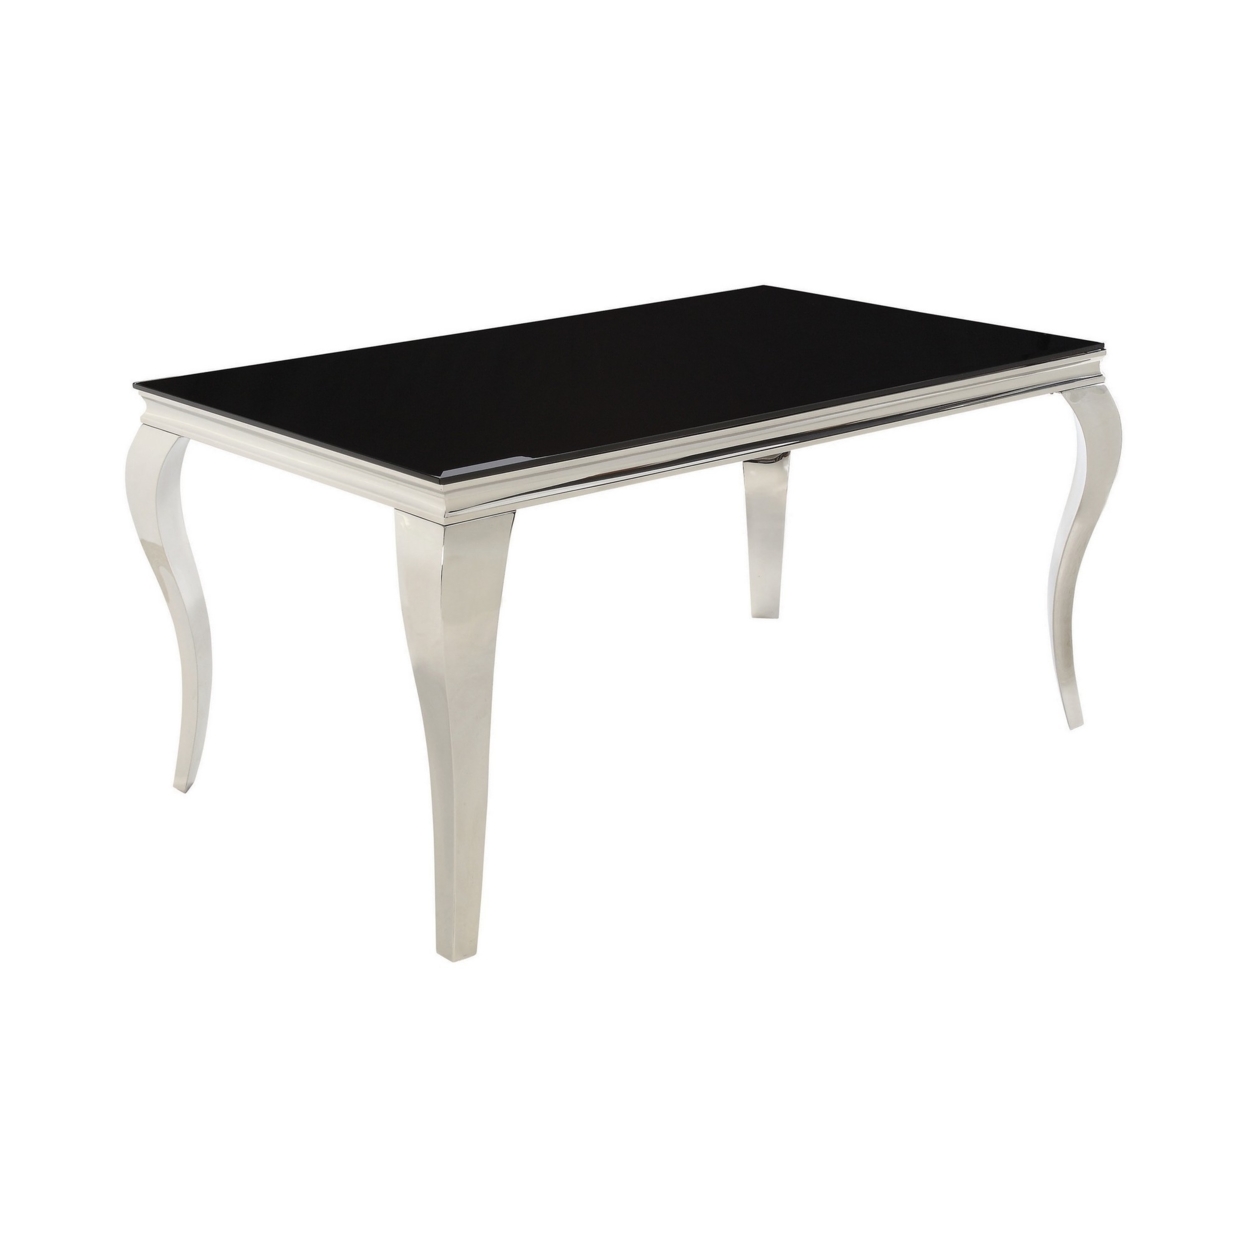 Dining Table With Glass Top And Metal Legs, Black And Chrome- Saltoro Sherpi